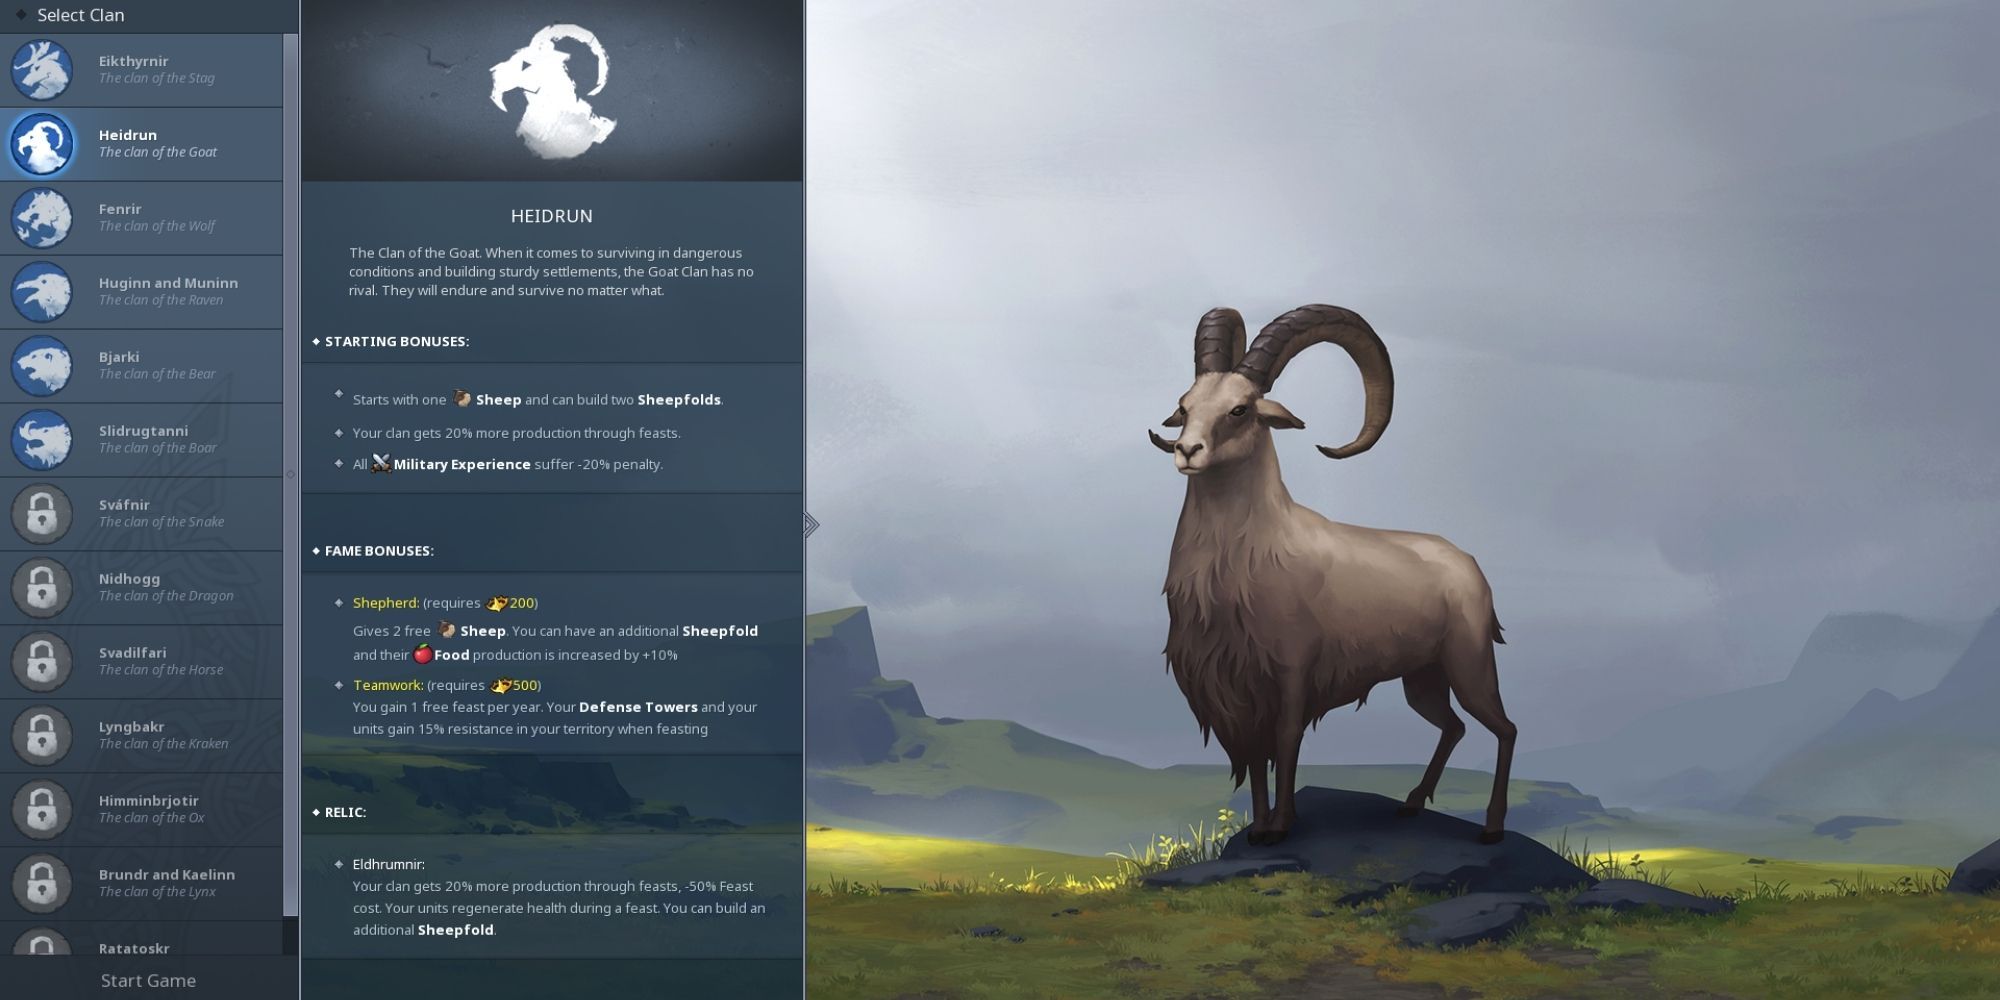 Northgard Heidrum Clan details and selection